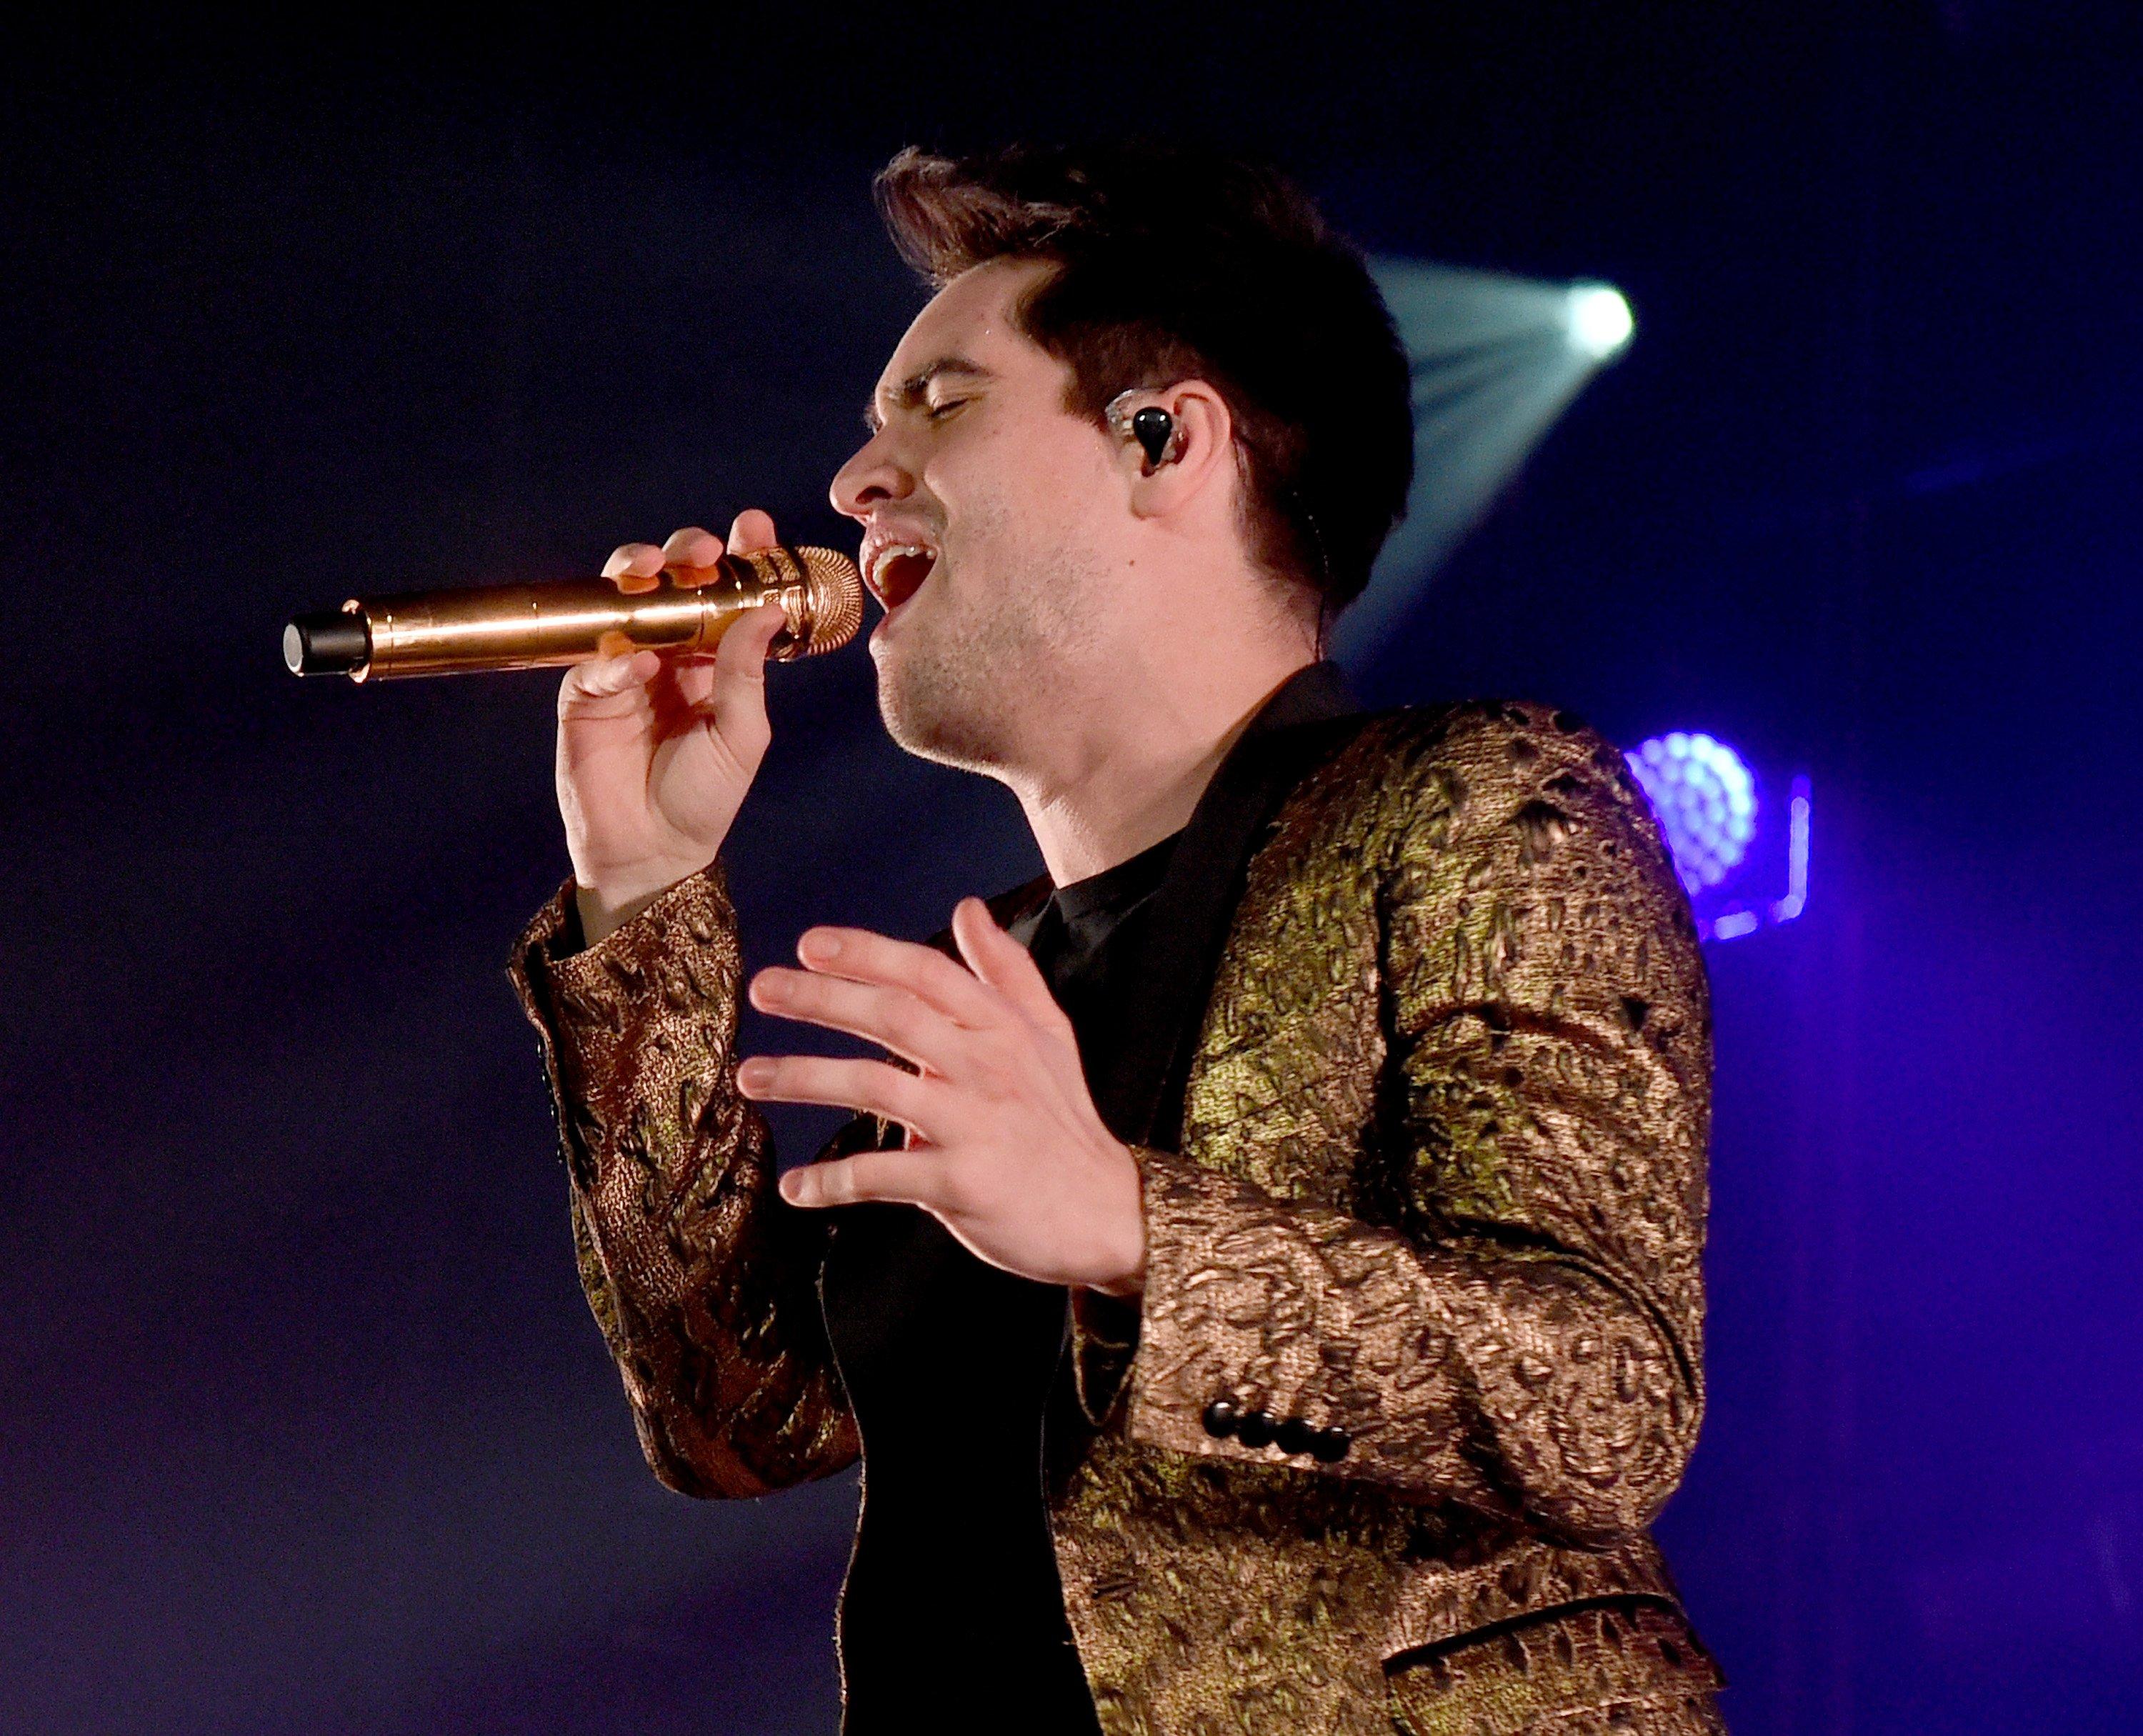 Panic! At The Disco's Brendon Urie performs in Los Angeles